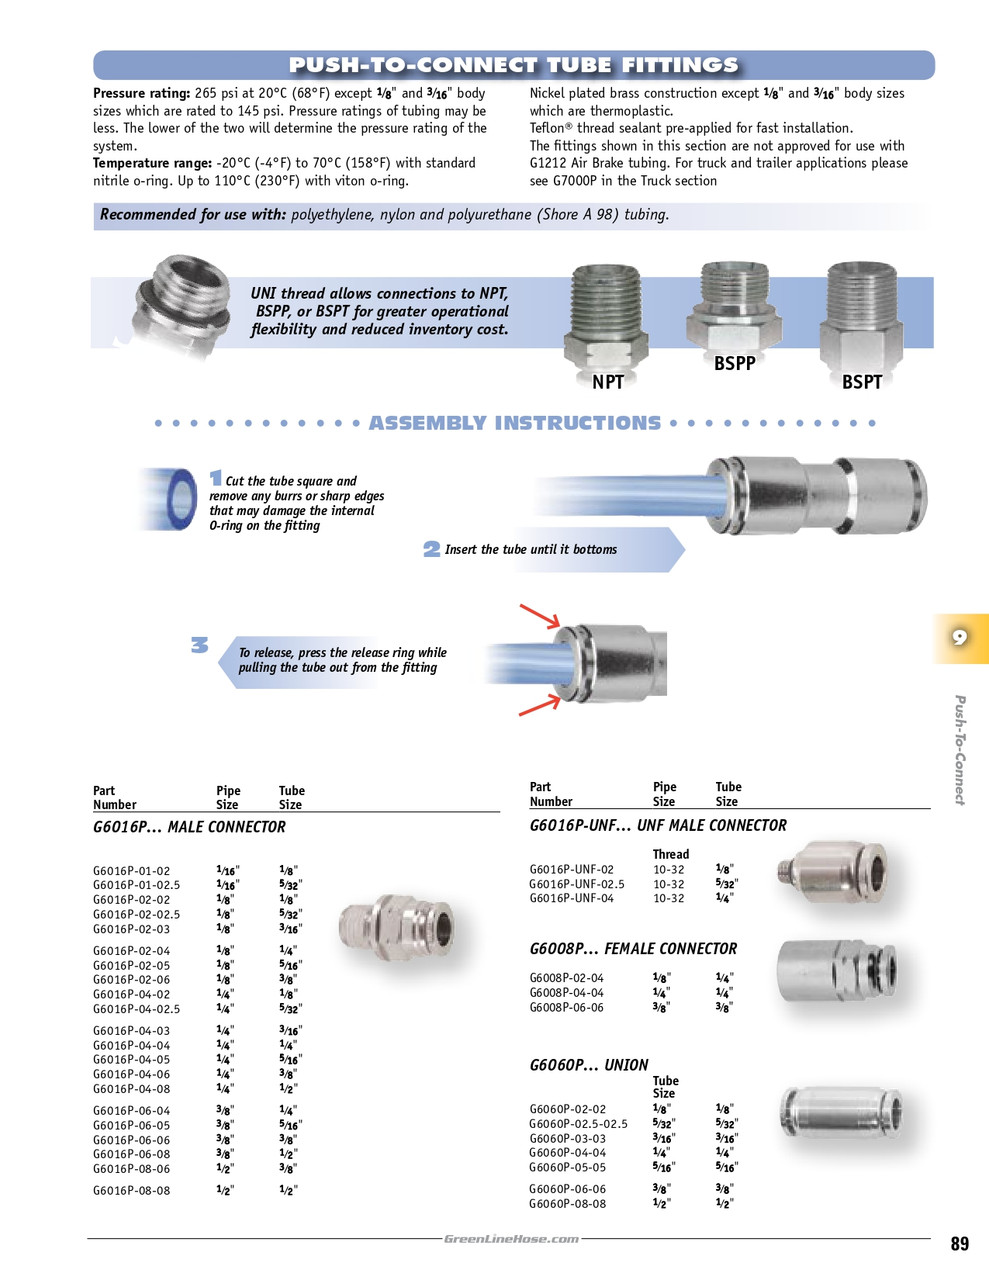 1/2" Nickel Plated Brass Push-To-Connect Union   G6060P-08-08